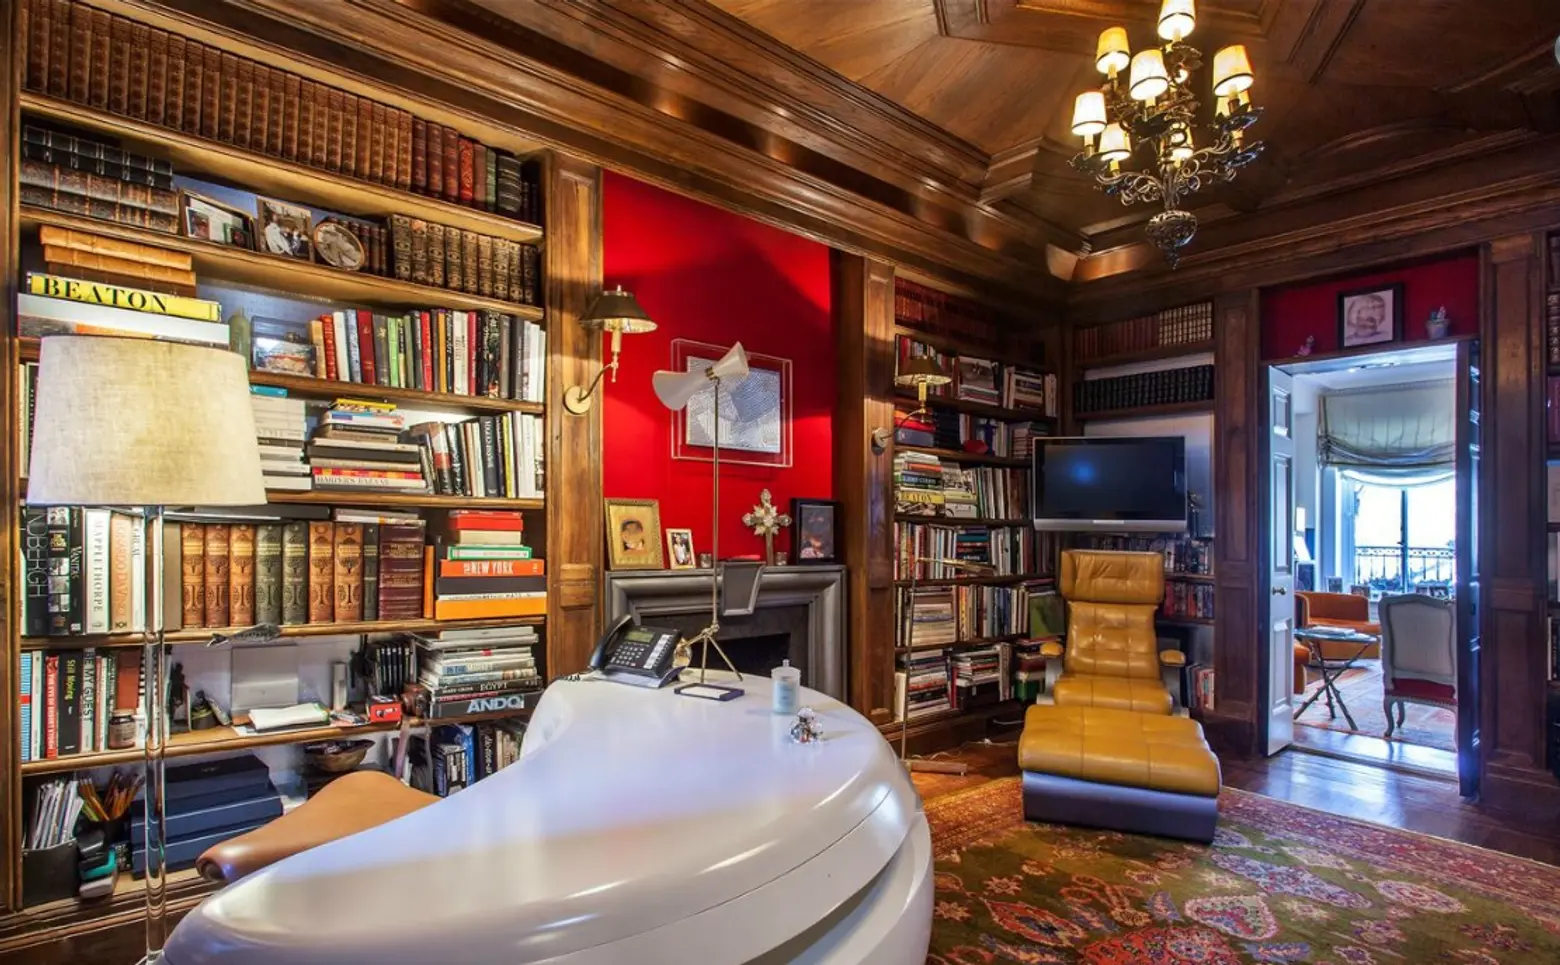 $12M Duplex Designed by Robert Couturier Brings a Bit of Versailles to the Upper East Side